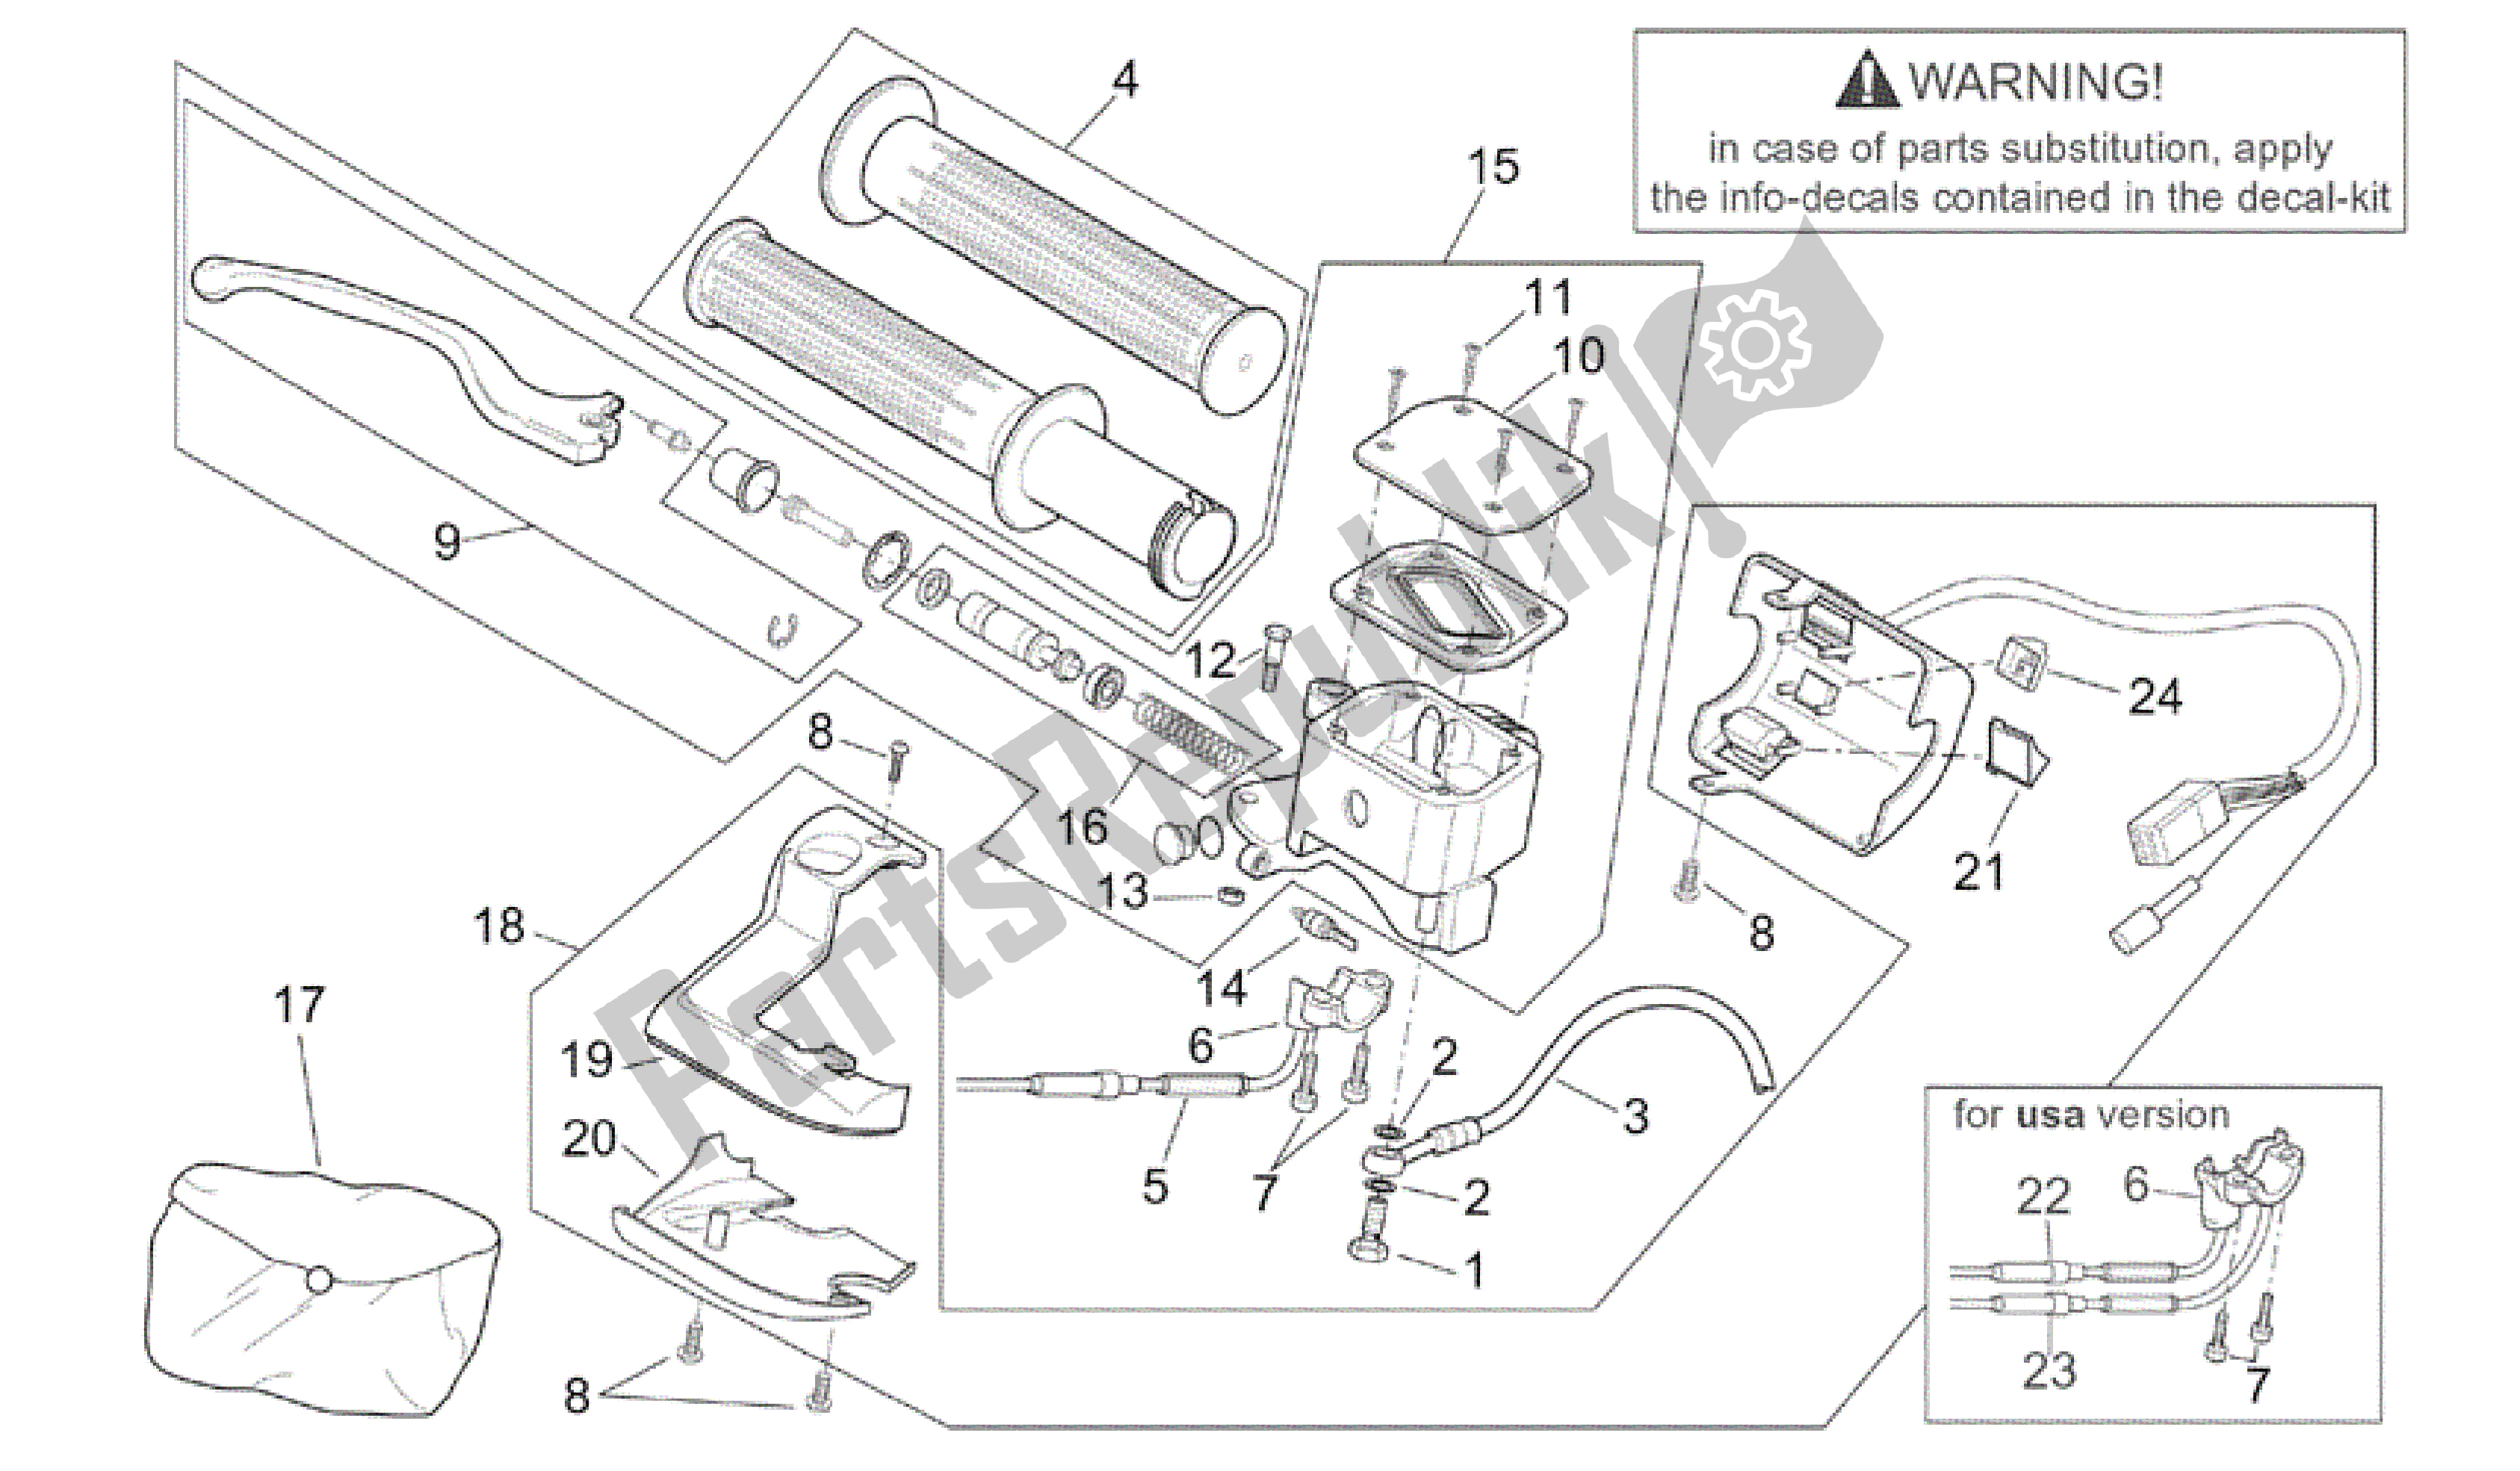 All parts for the Rh Controls of the Aprilia Scarabeo 200 1999 - 2004